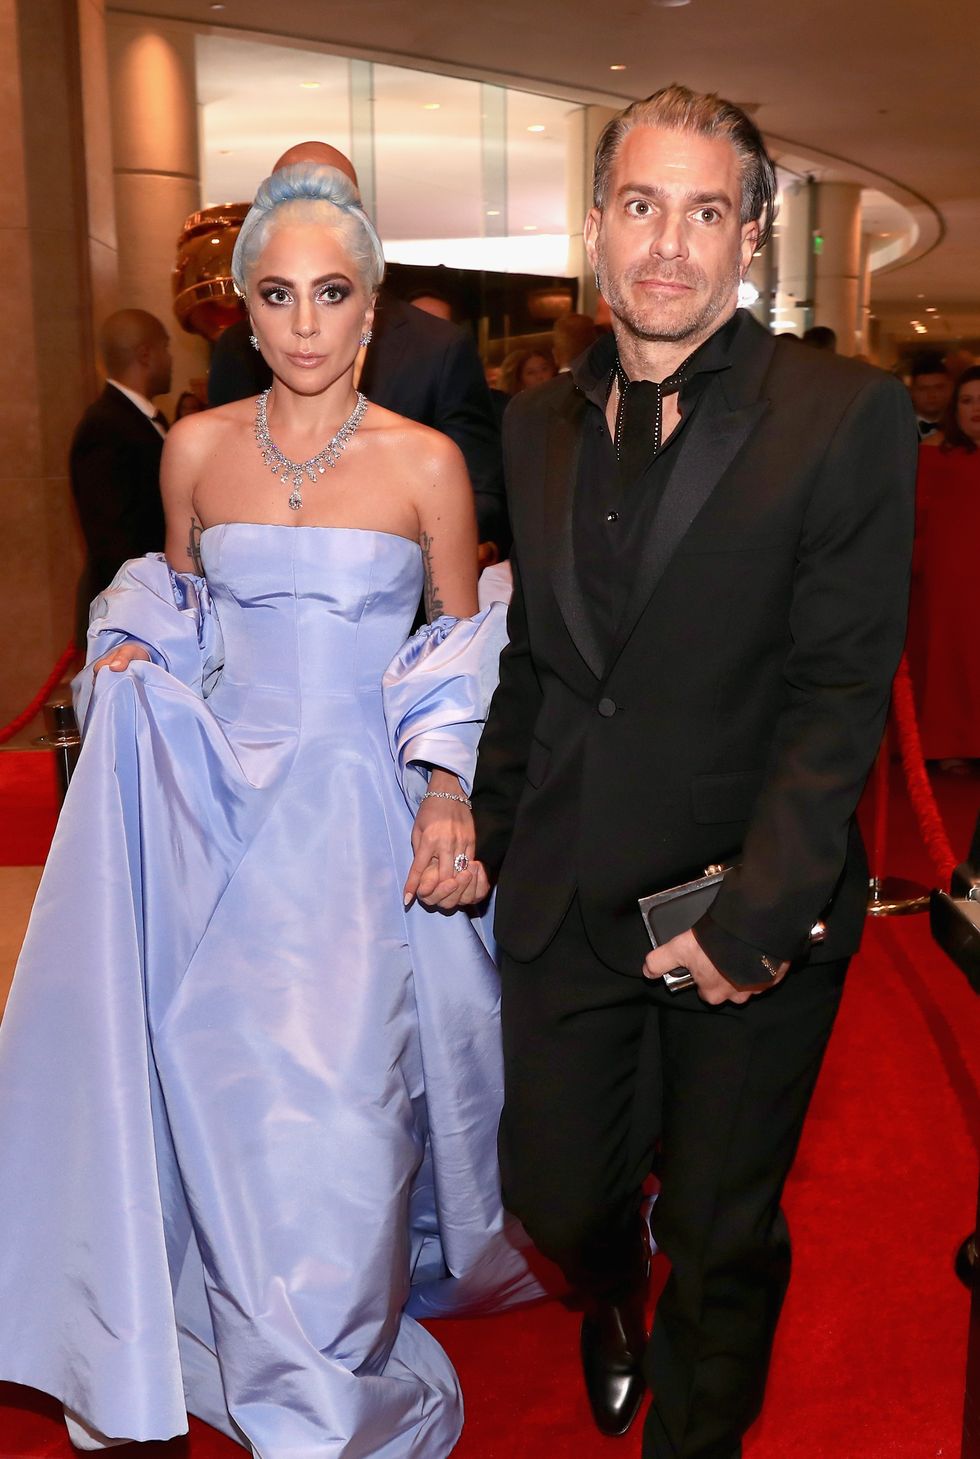 Lady Gaga Brings Her Fiancé Christian Carino to the 2019 Golden Globes